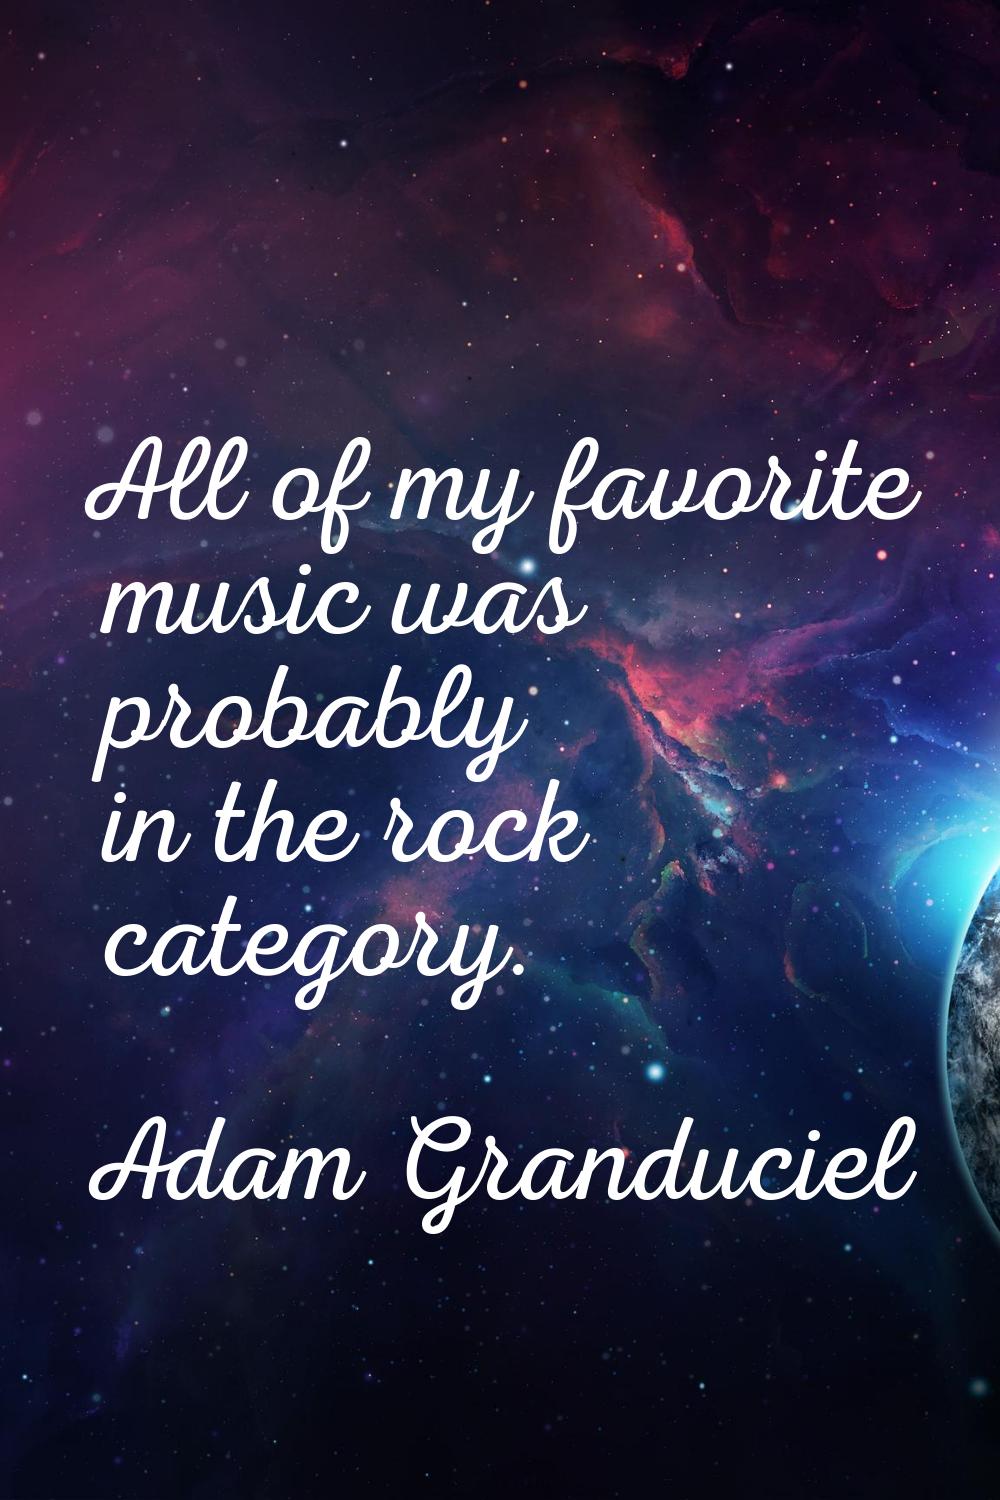 All of my favorite music was probably in the rock category.